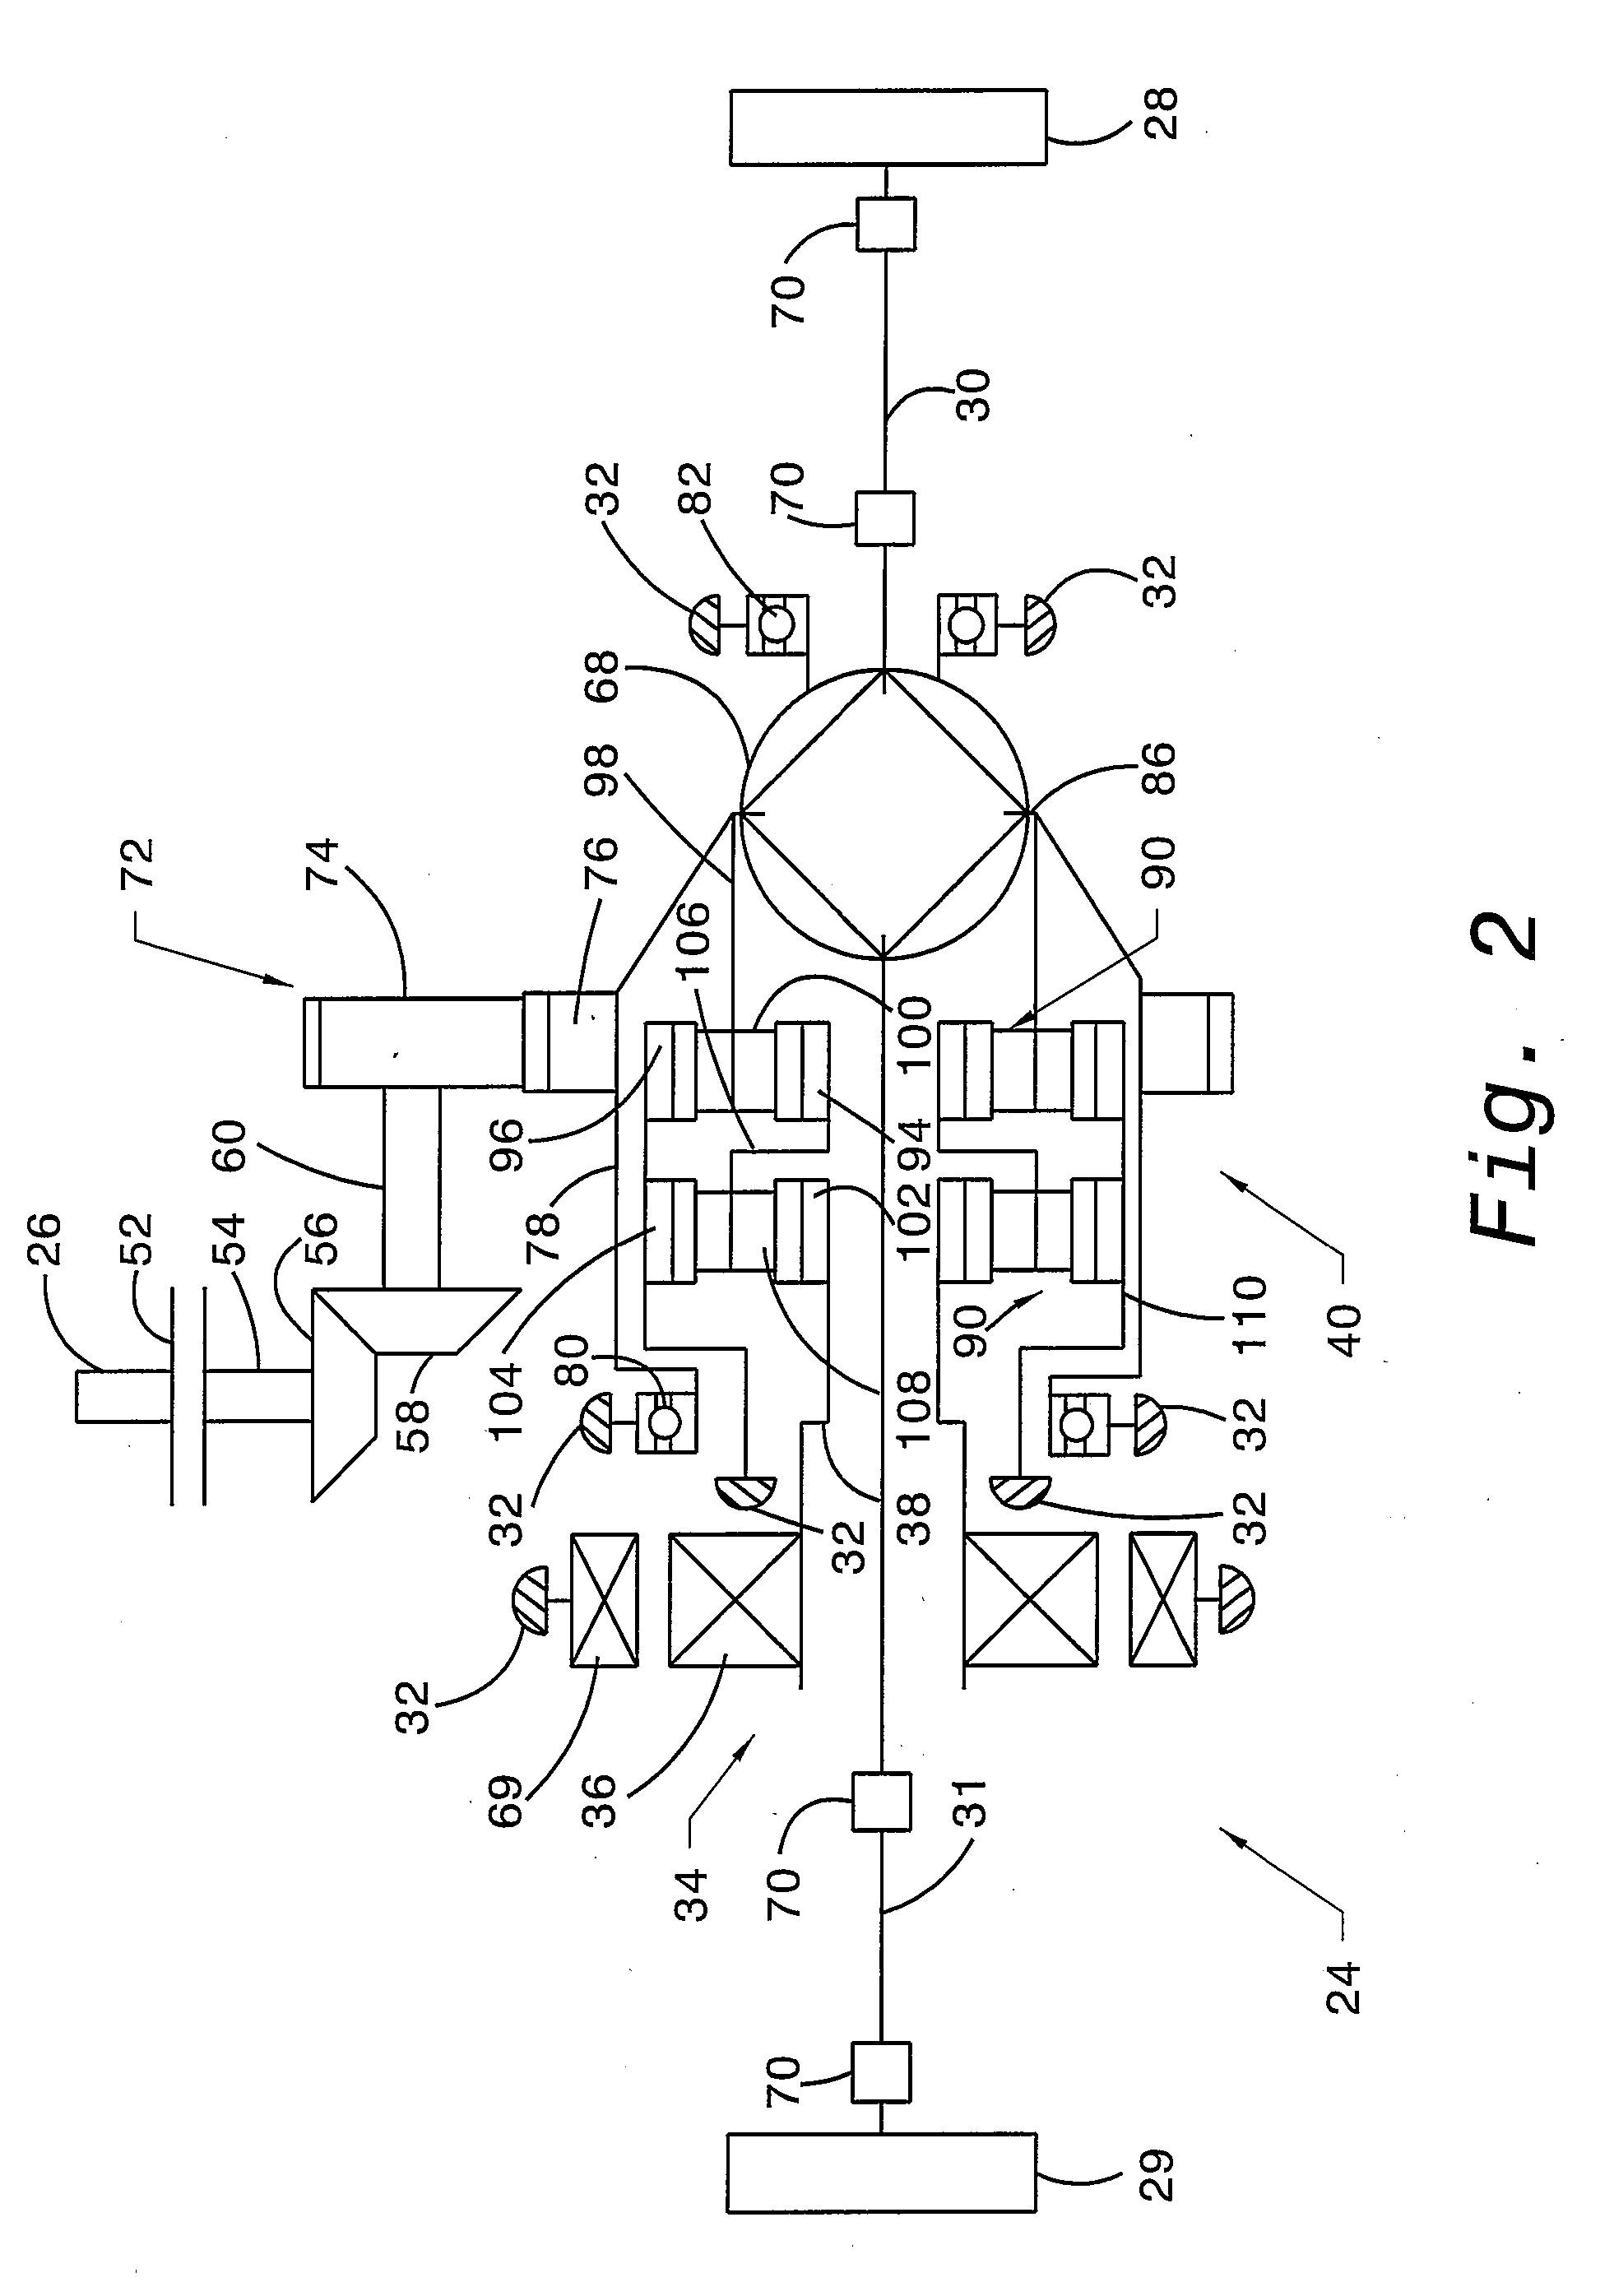 Axle drive unit for a hybrid electric vehicle